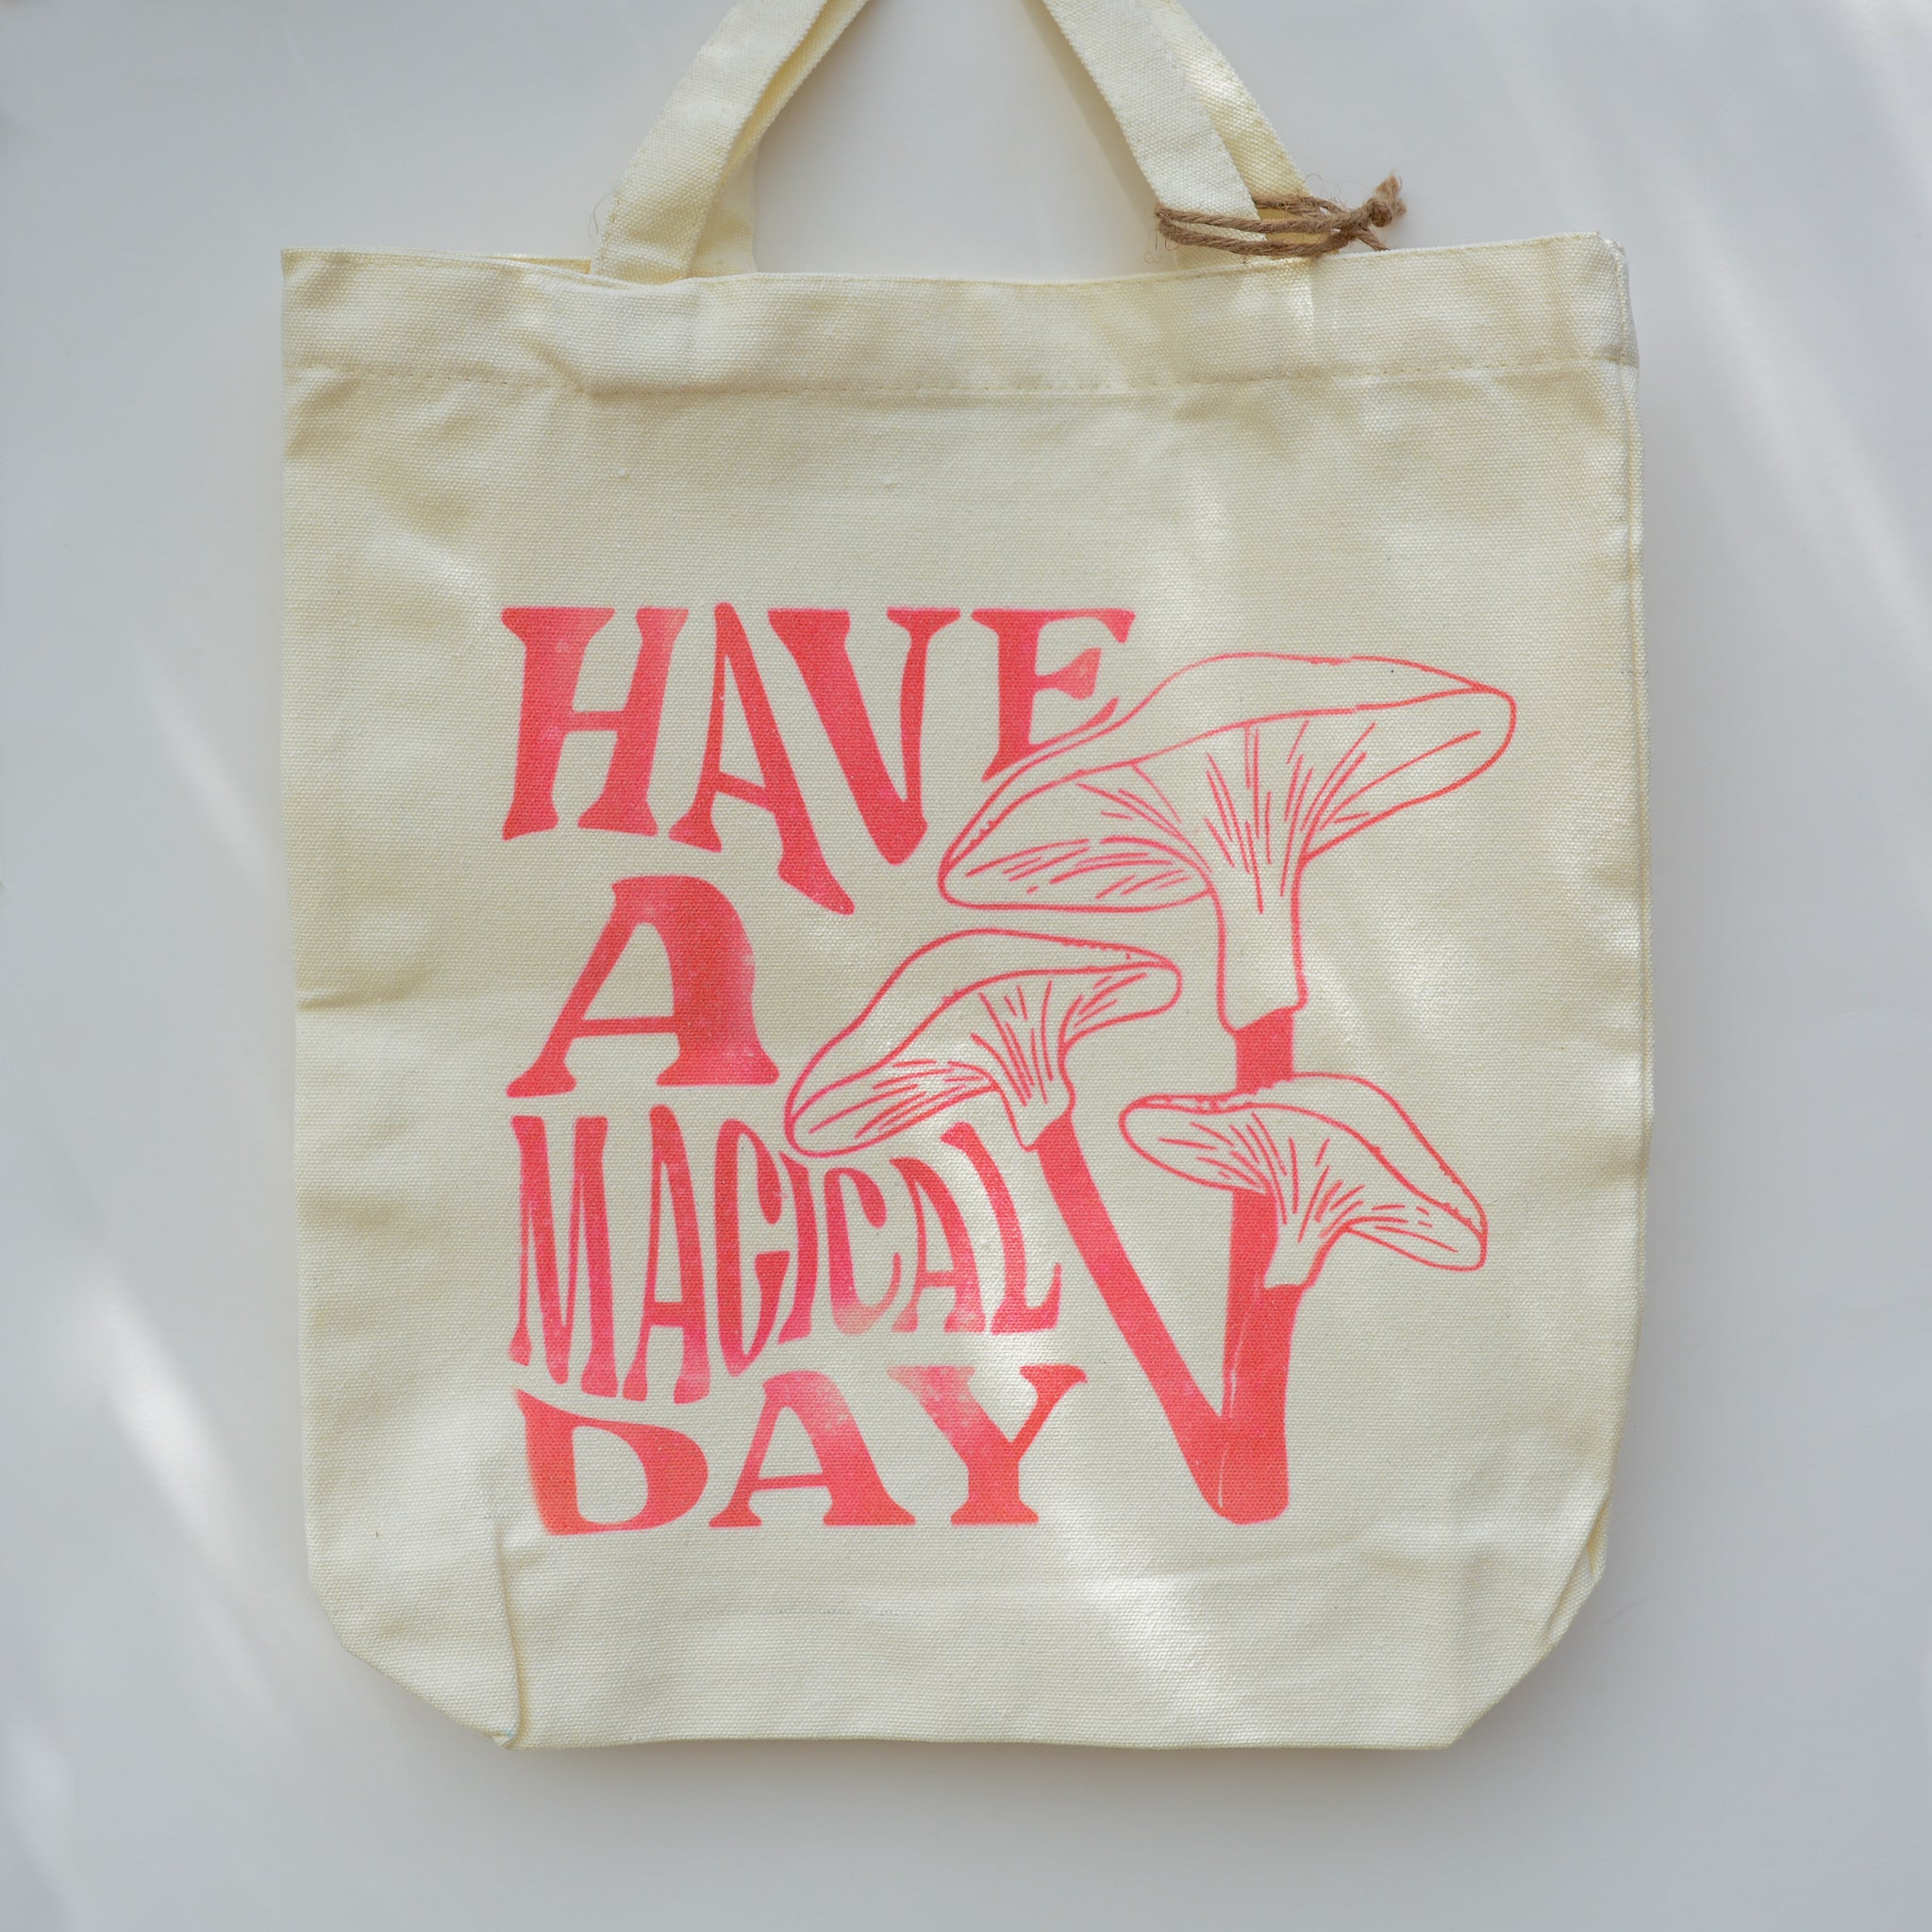 MAGICAL DAY TOTE- HOT PINK